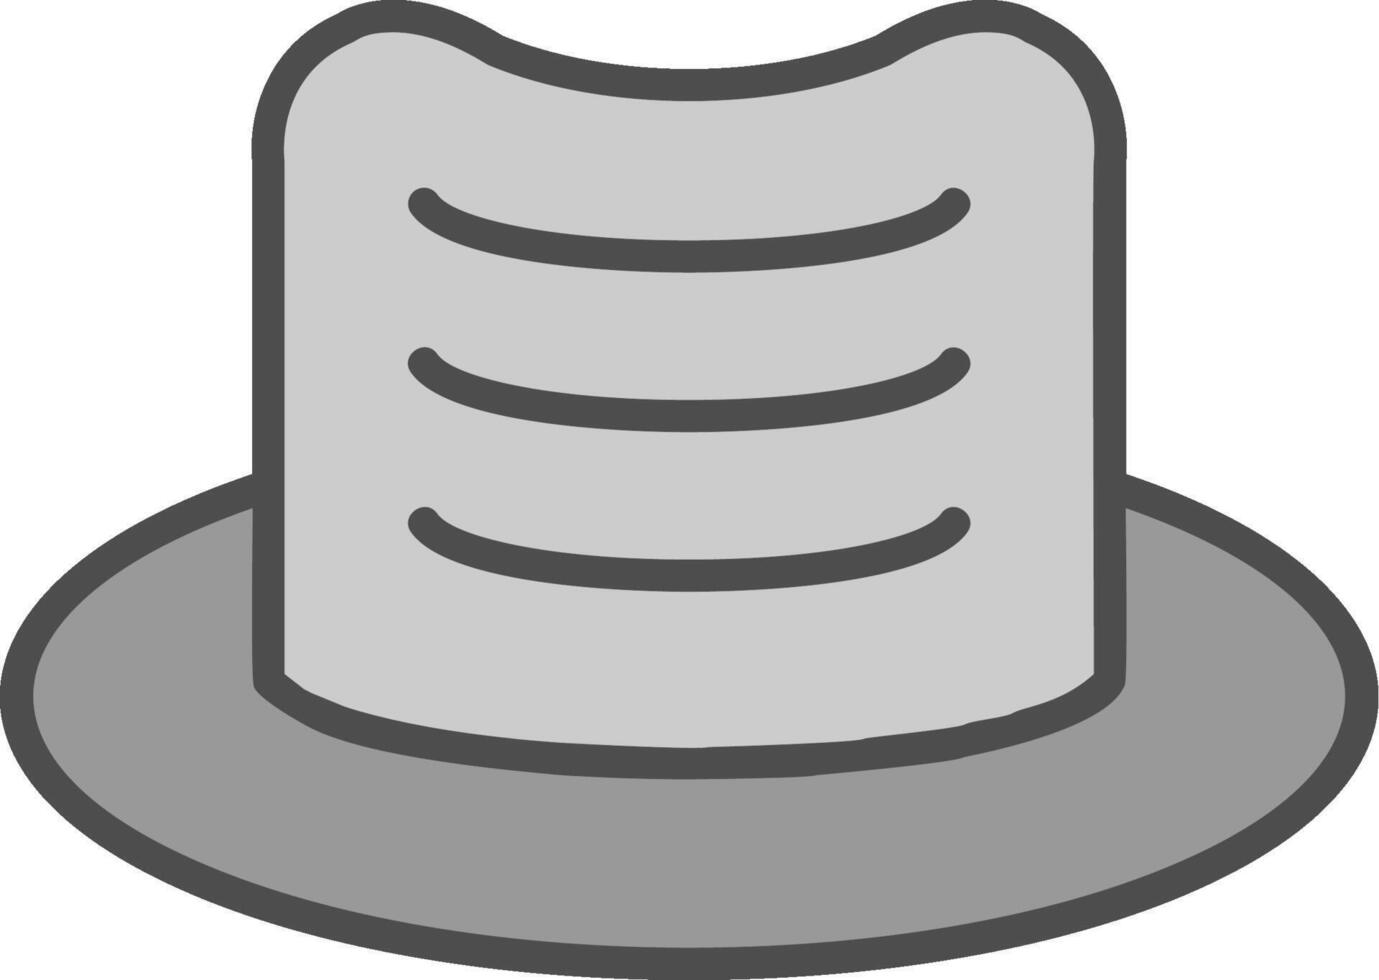 Hat Line Filled Greyscale Icon Design vector